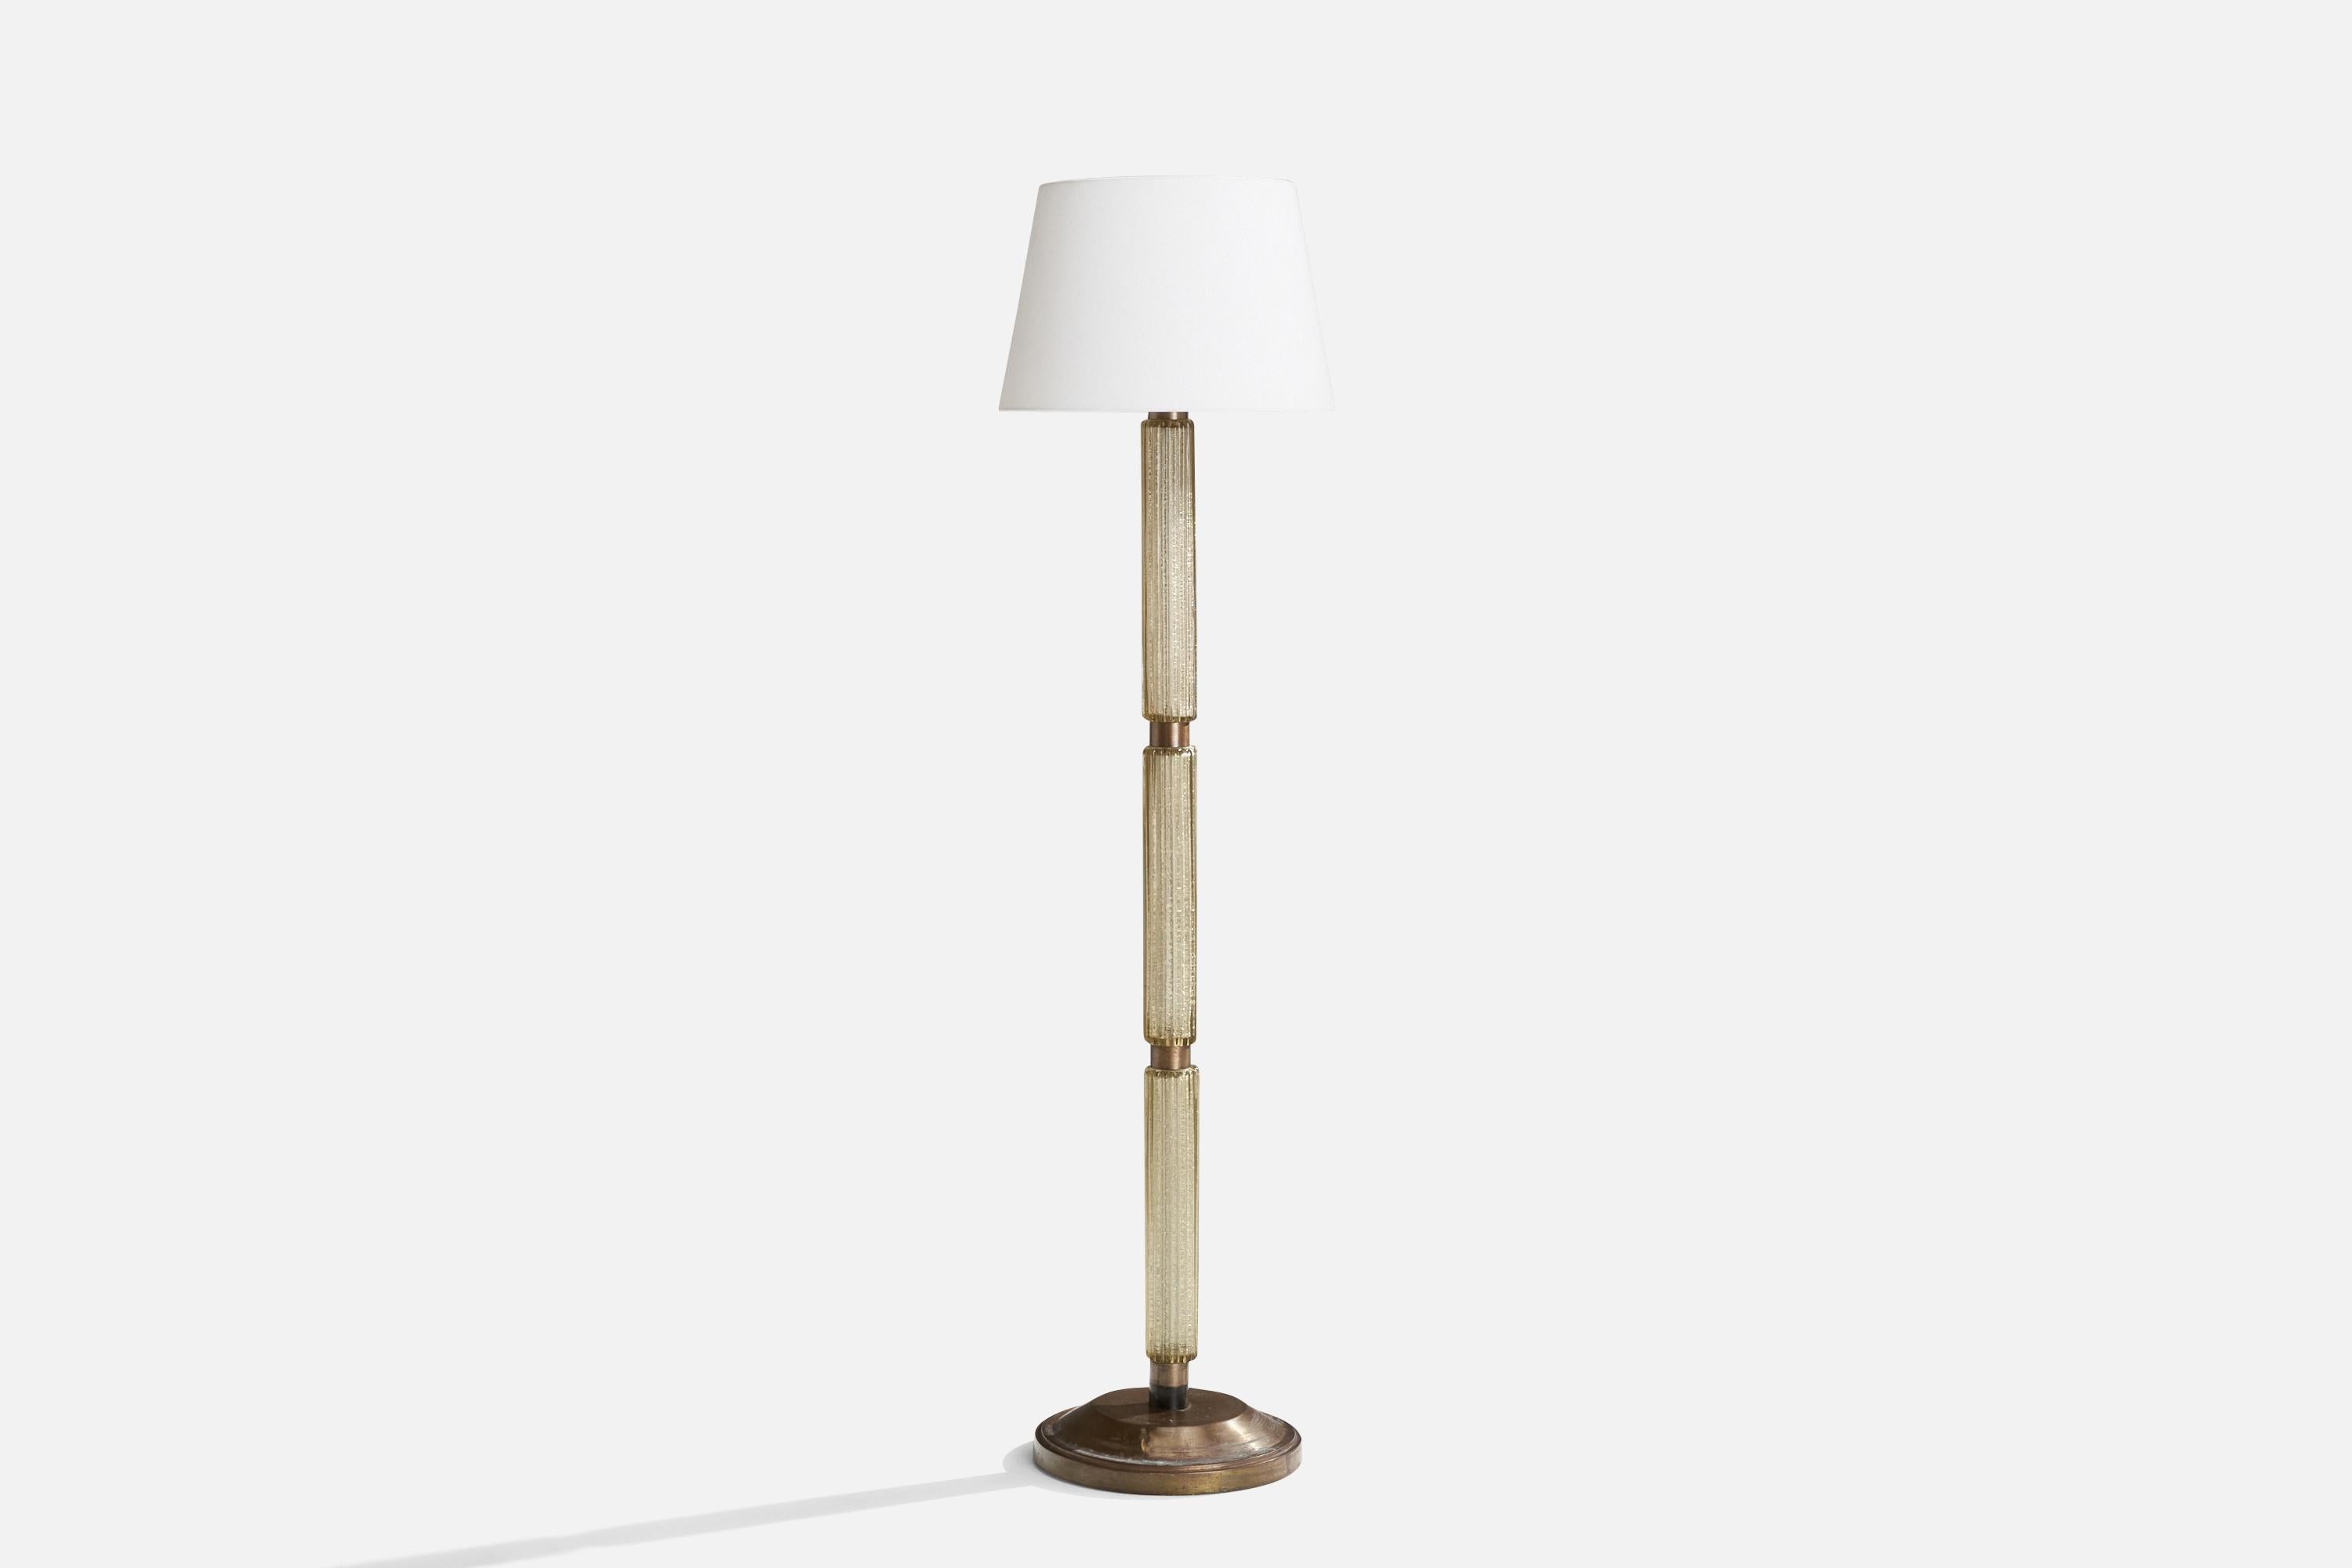 A brass and glass floor lamp designed and produced in Italy, c. 1930s.

Overall Dimensions (inches): 62” H x 16” W x 16.5” D
Stated dimensions include shade.
Bulb Specifications: E-26 Bulb
Number of Sockets: 1
All lighting will be converted for US